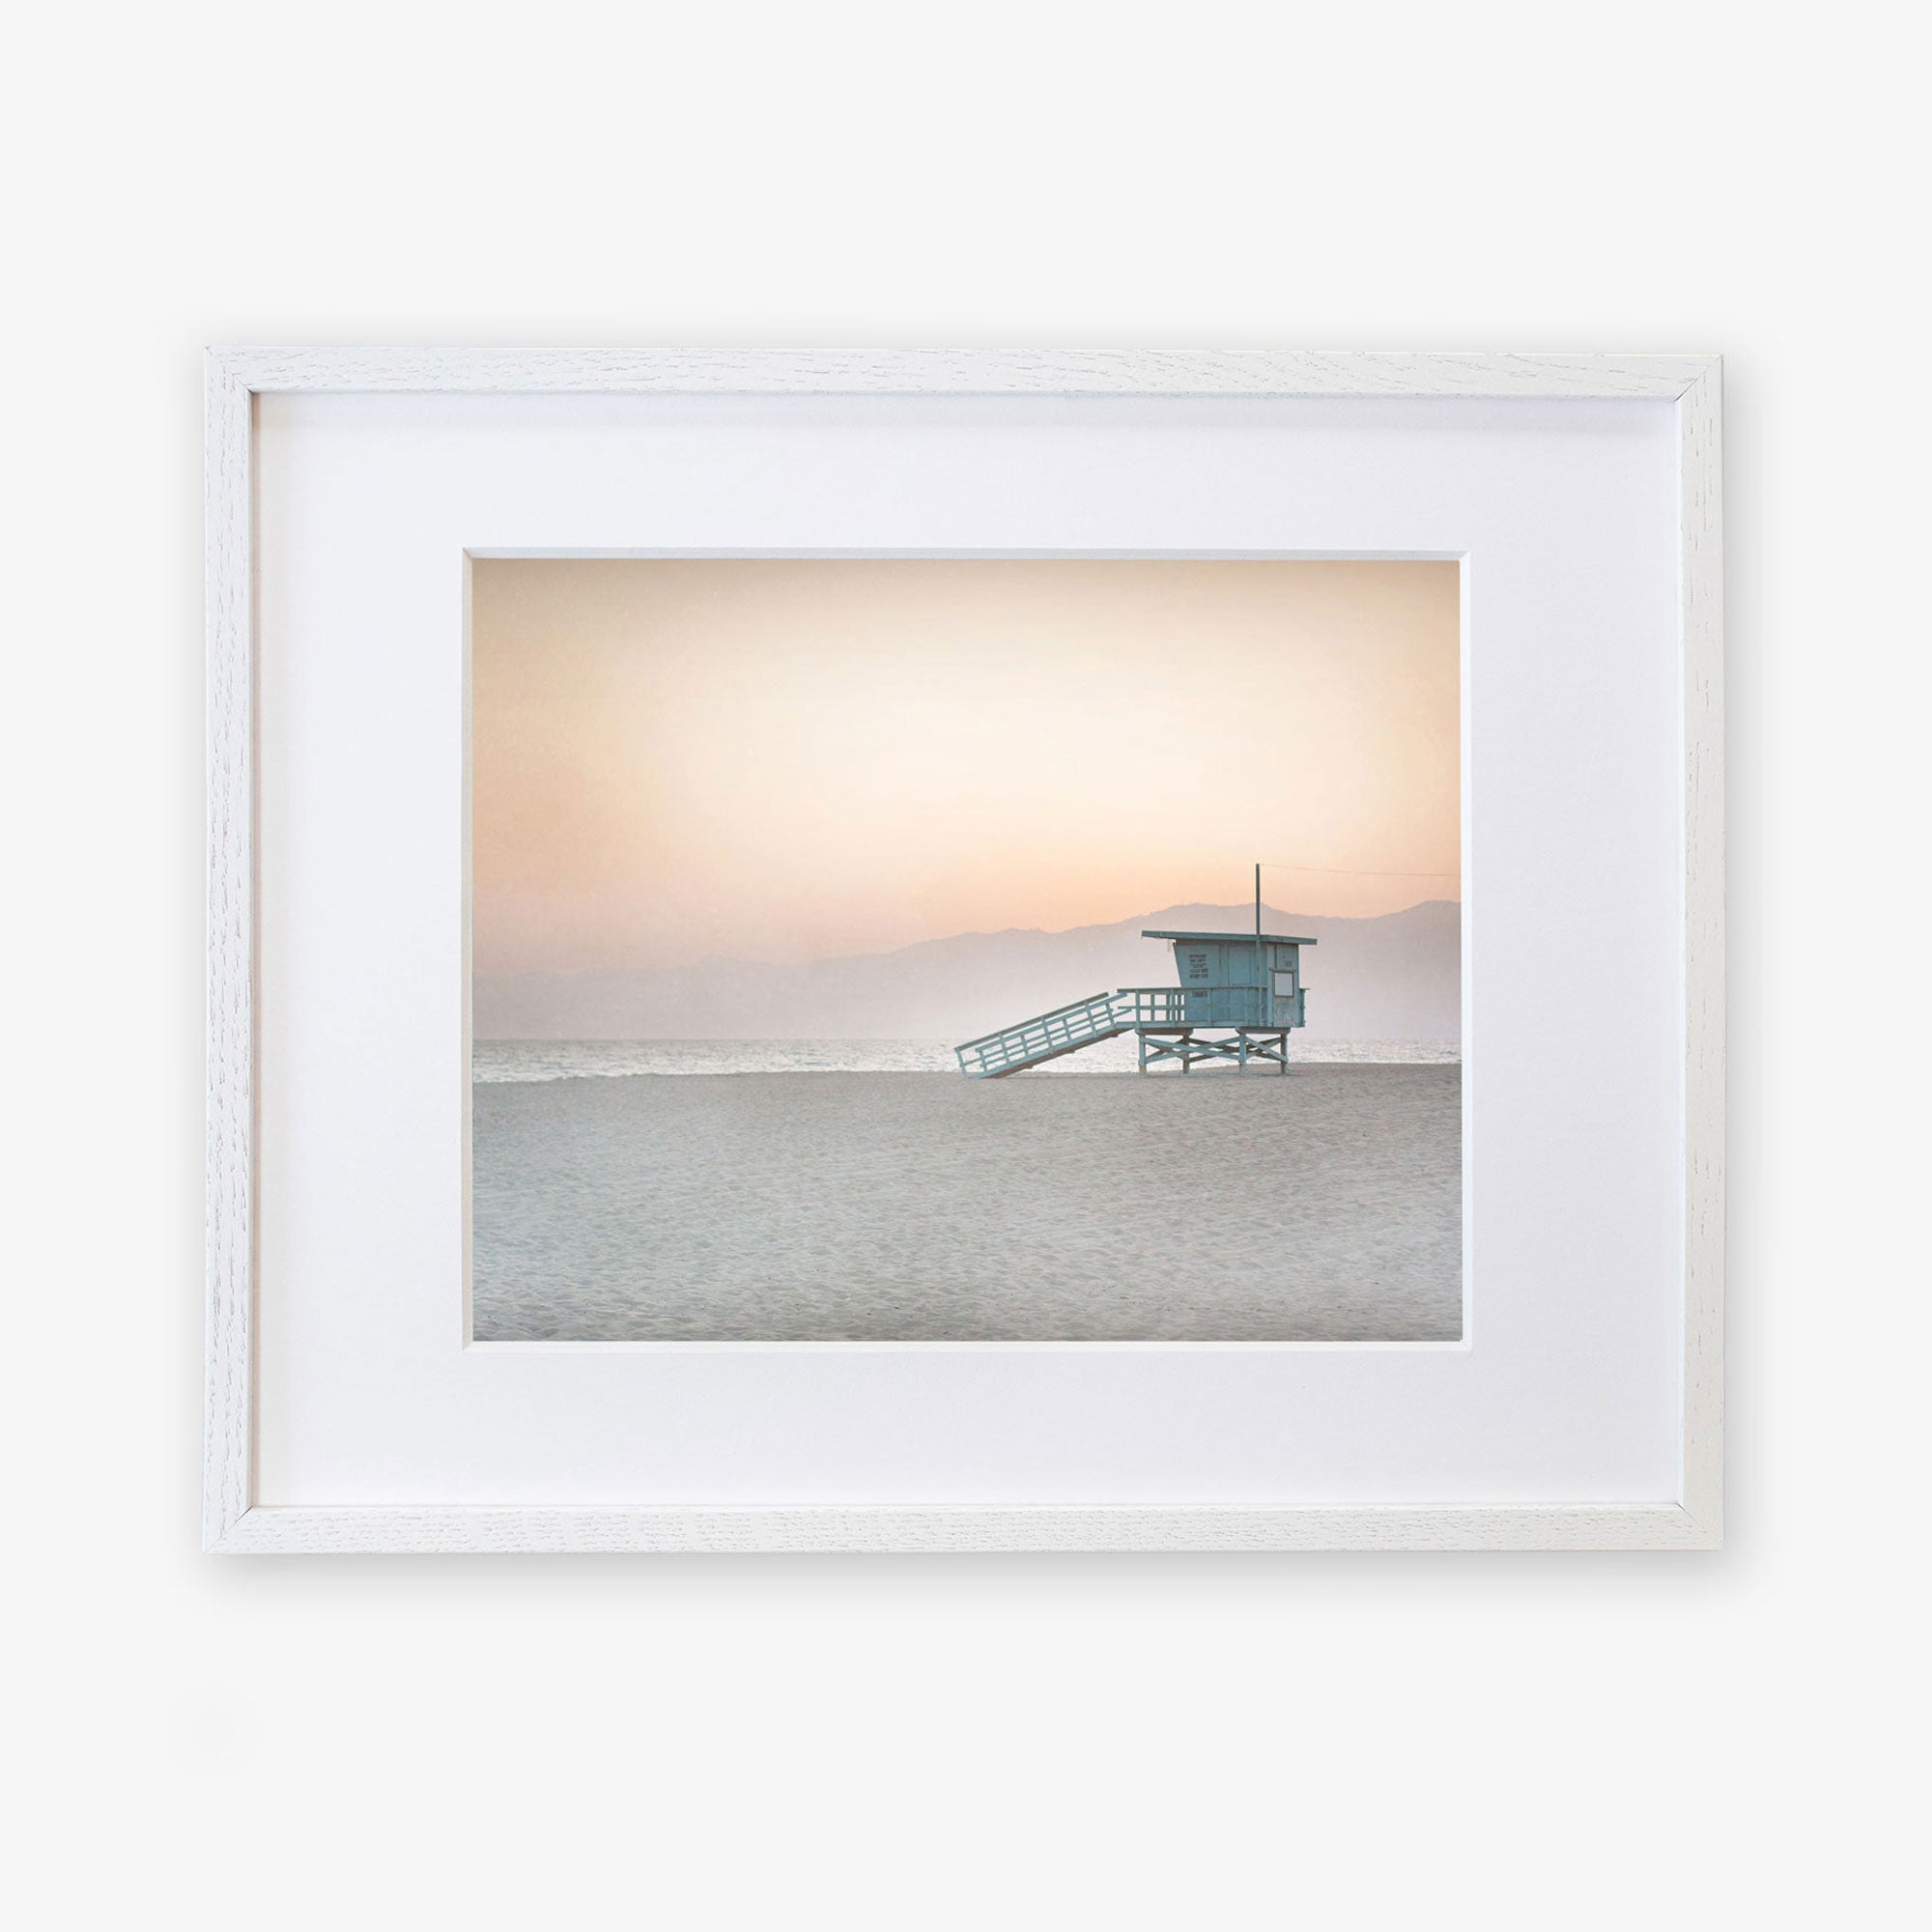 A framed photograph of a Pink Coastal Print, 'Lifeguard Tower' by Offley Green, on archival photographic paper.